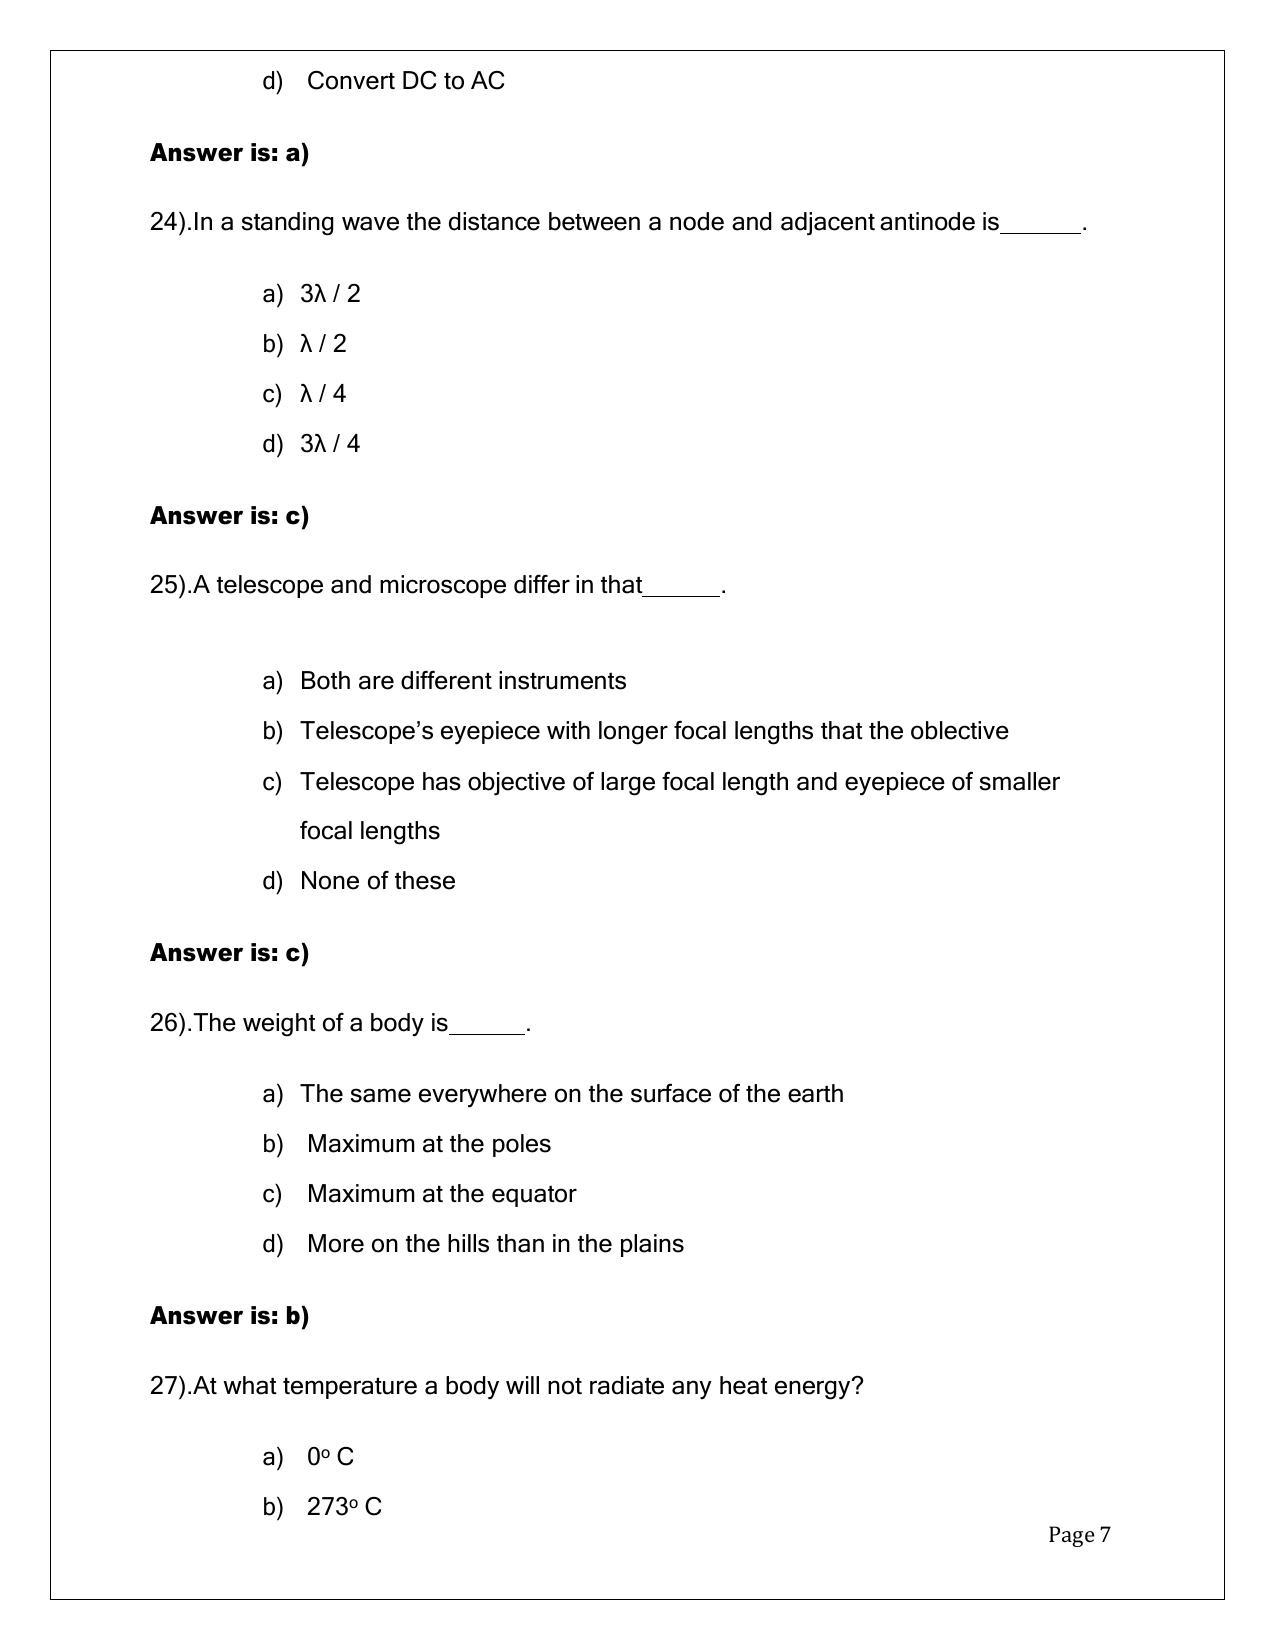 OUAT Physics Sample Paper - Page 7